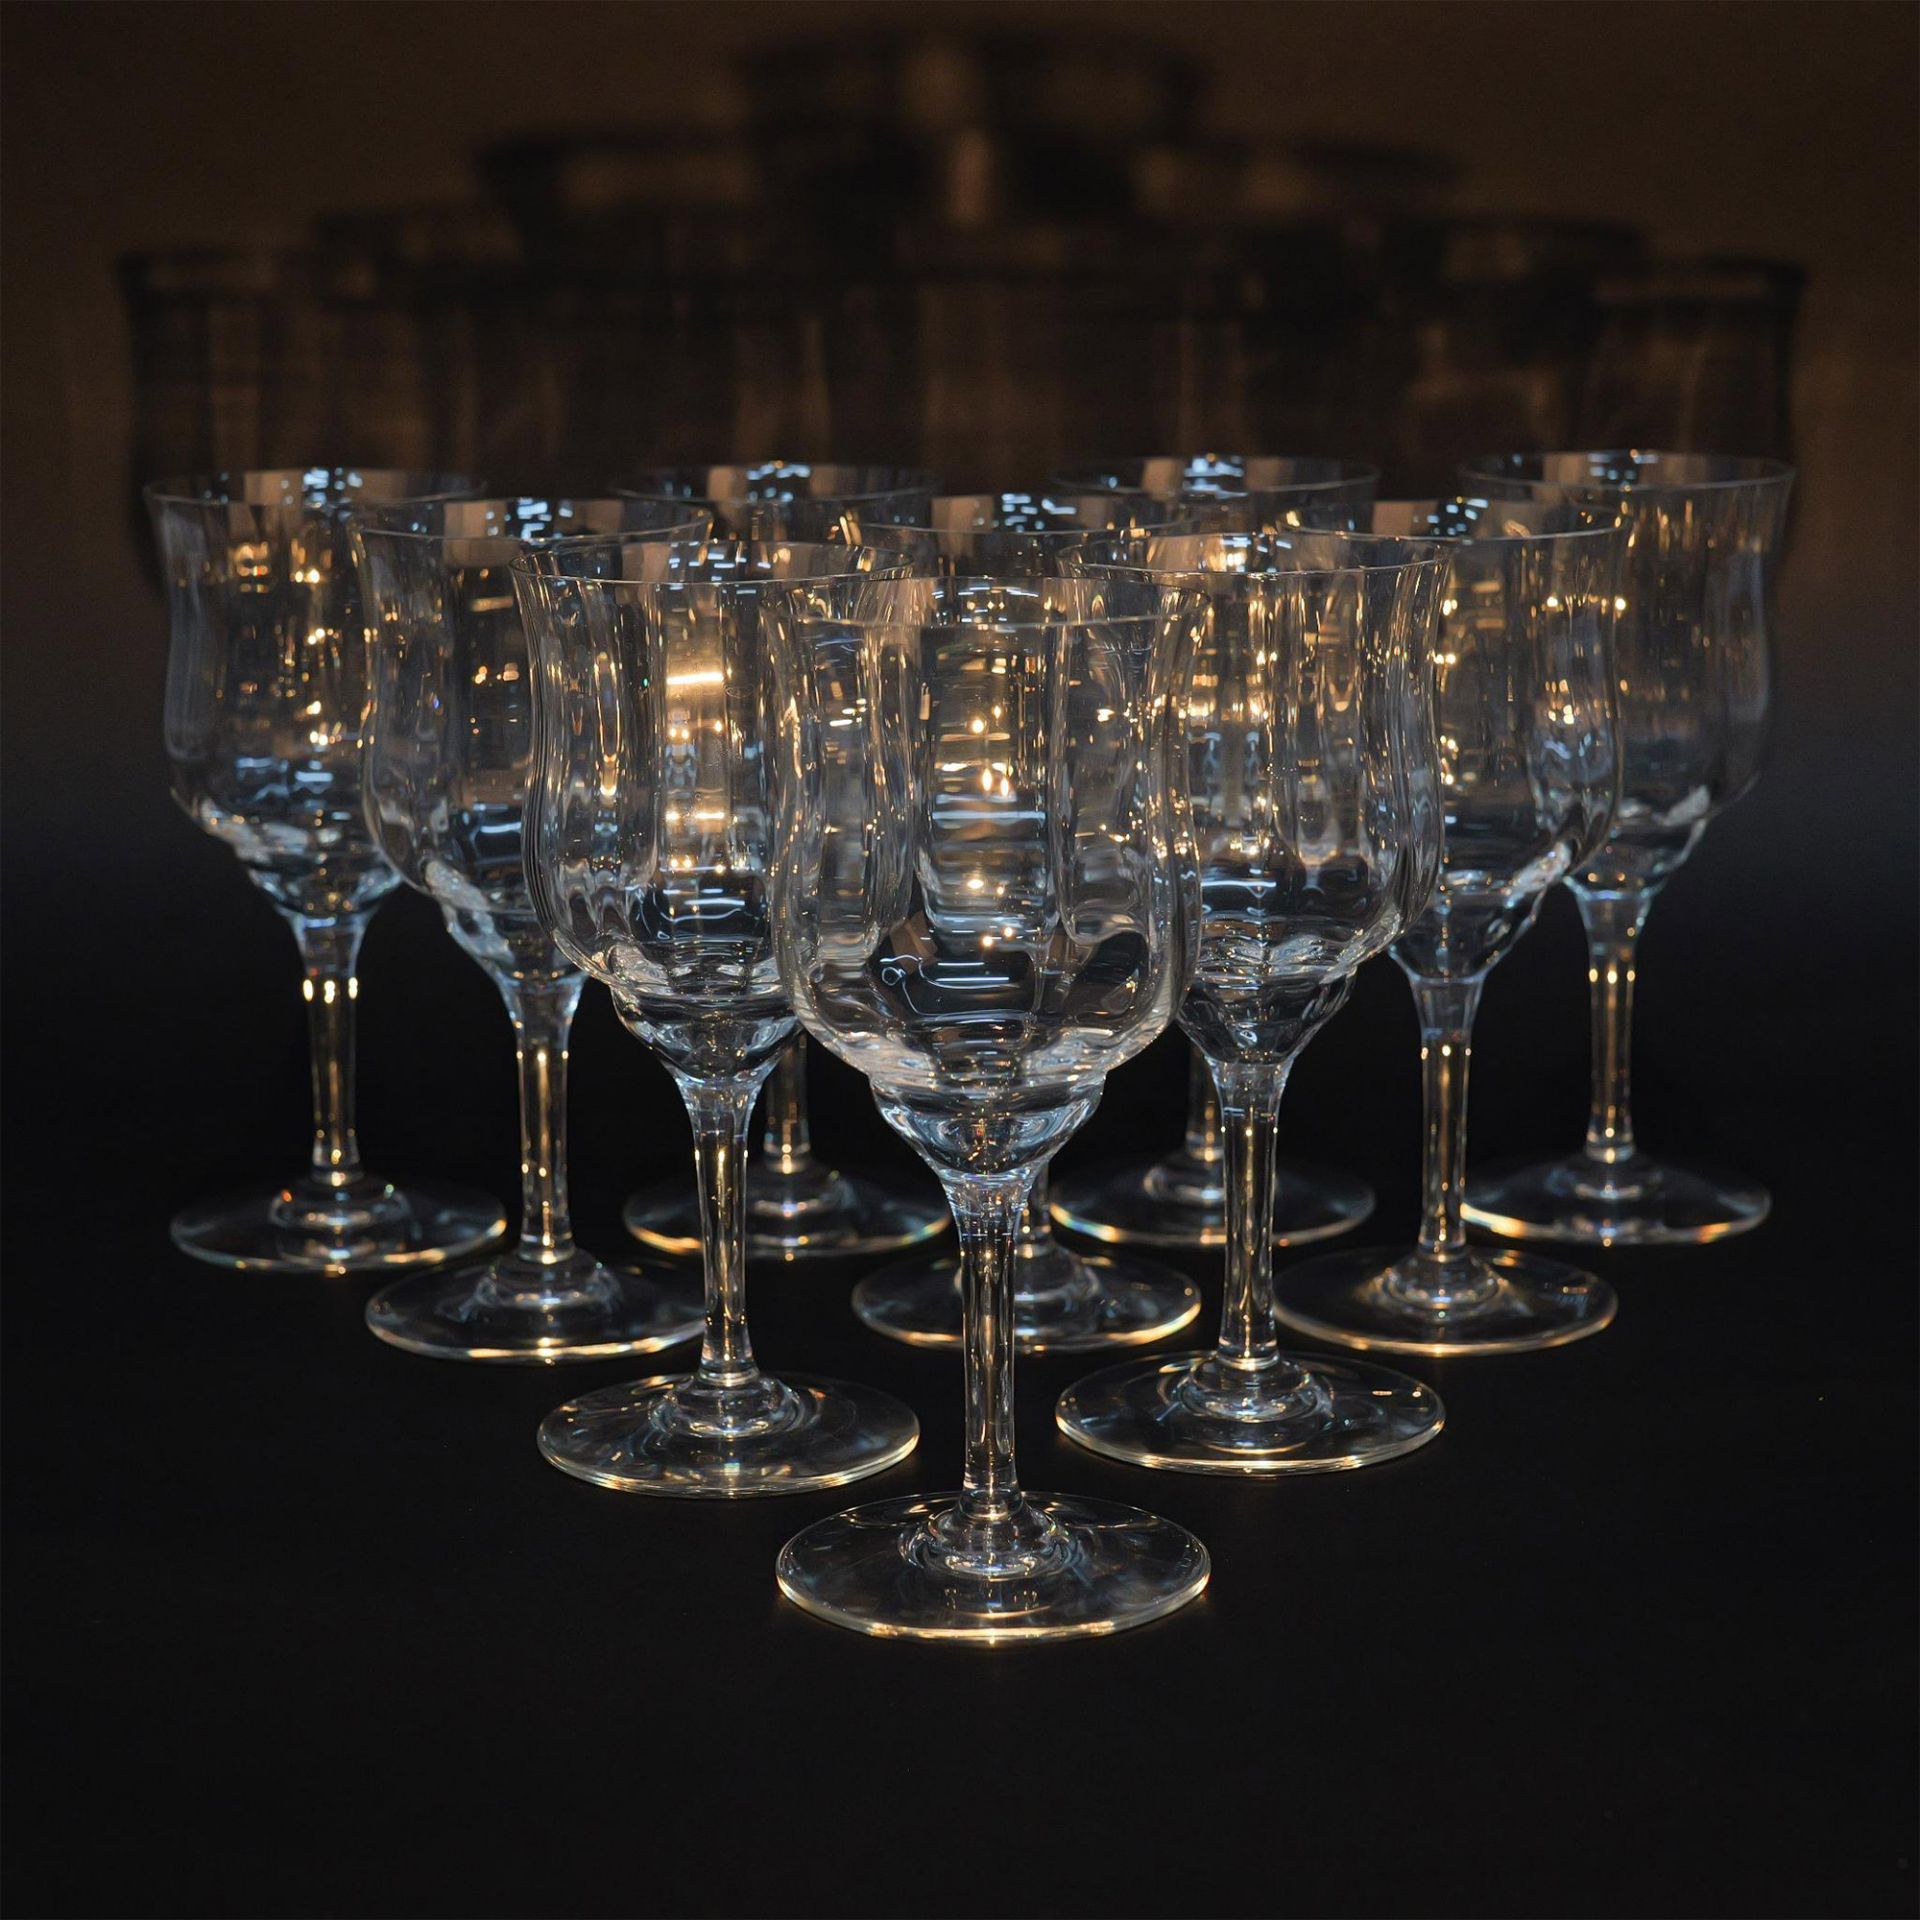 10pc Baccarat Crystal Tall Water Goblets, Capri Optic